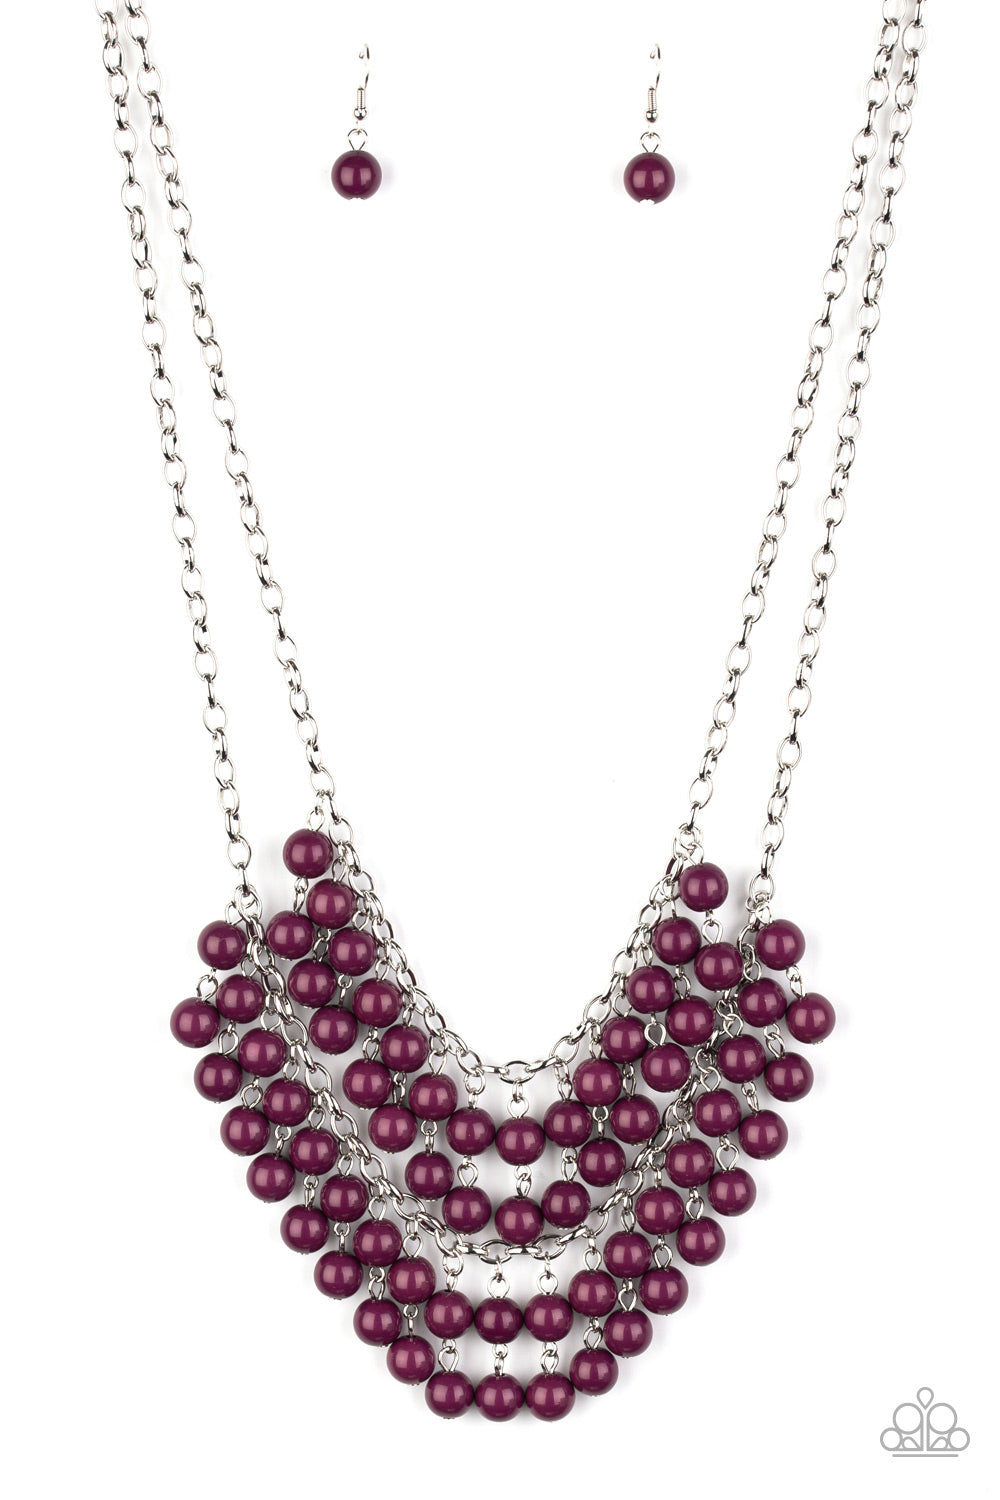 Bubbly Boardwalk Purple Necklace - Paparazzi Accessories  Pairs of plum beads cascade from the bottoms of two silver chains, creating a vivaciously layered fringe below the collar. Features an adjustable clasp closure.  All Paparazzi Accessories are lead free and nickel free!  Sold as one individual necklace. Includes one pair of matching earrings.